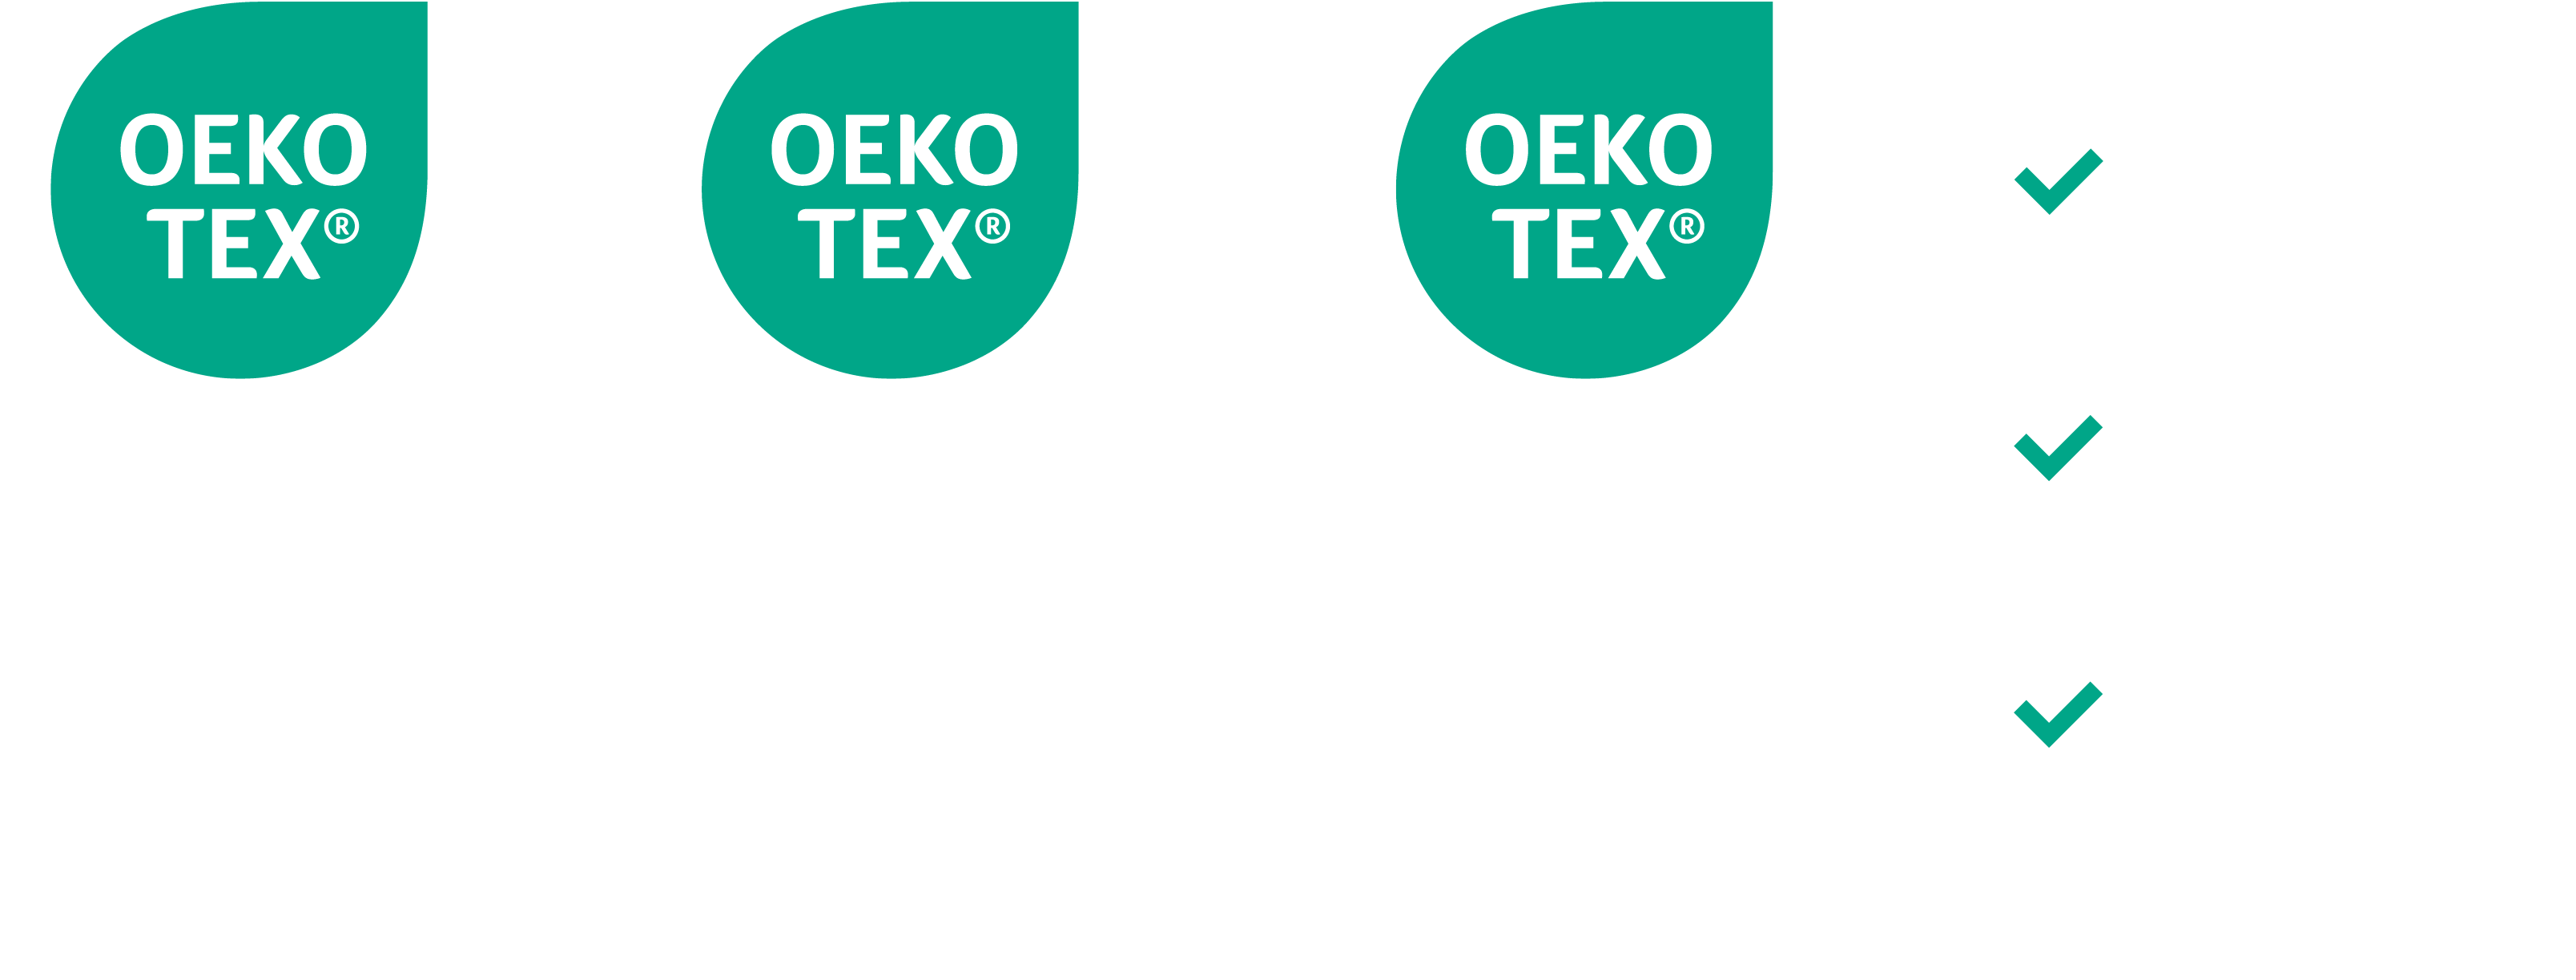 Find out what STANDARD 100 by OEKO-TEX® means in regards to high